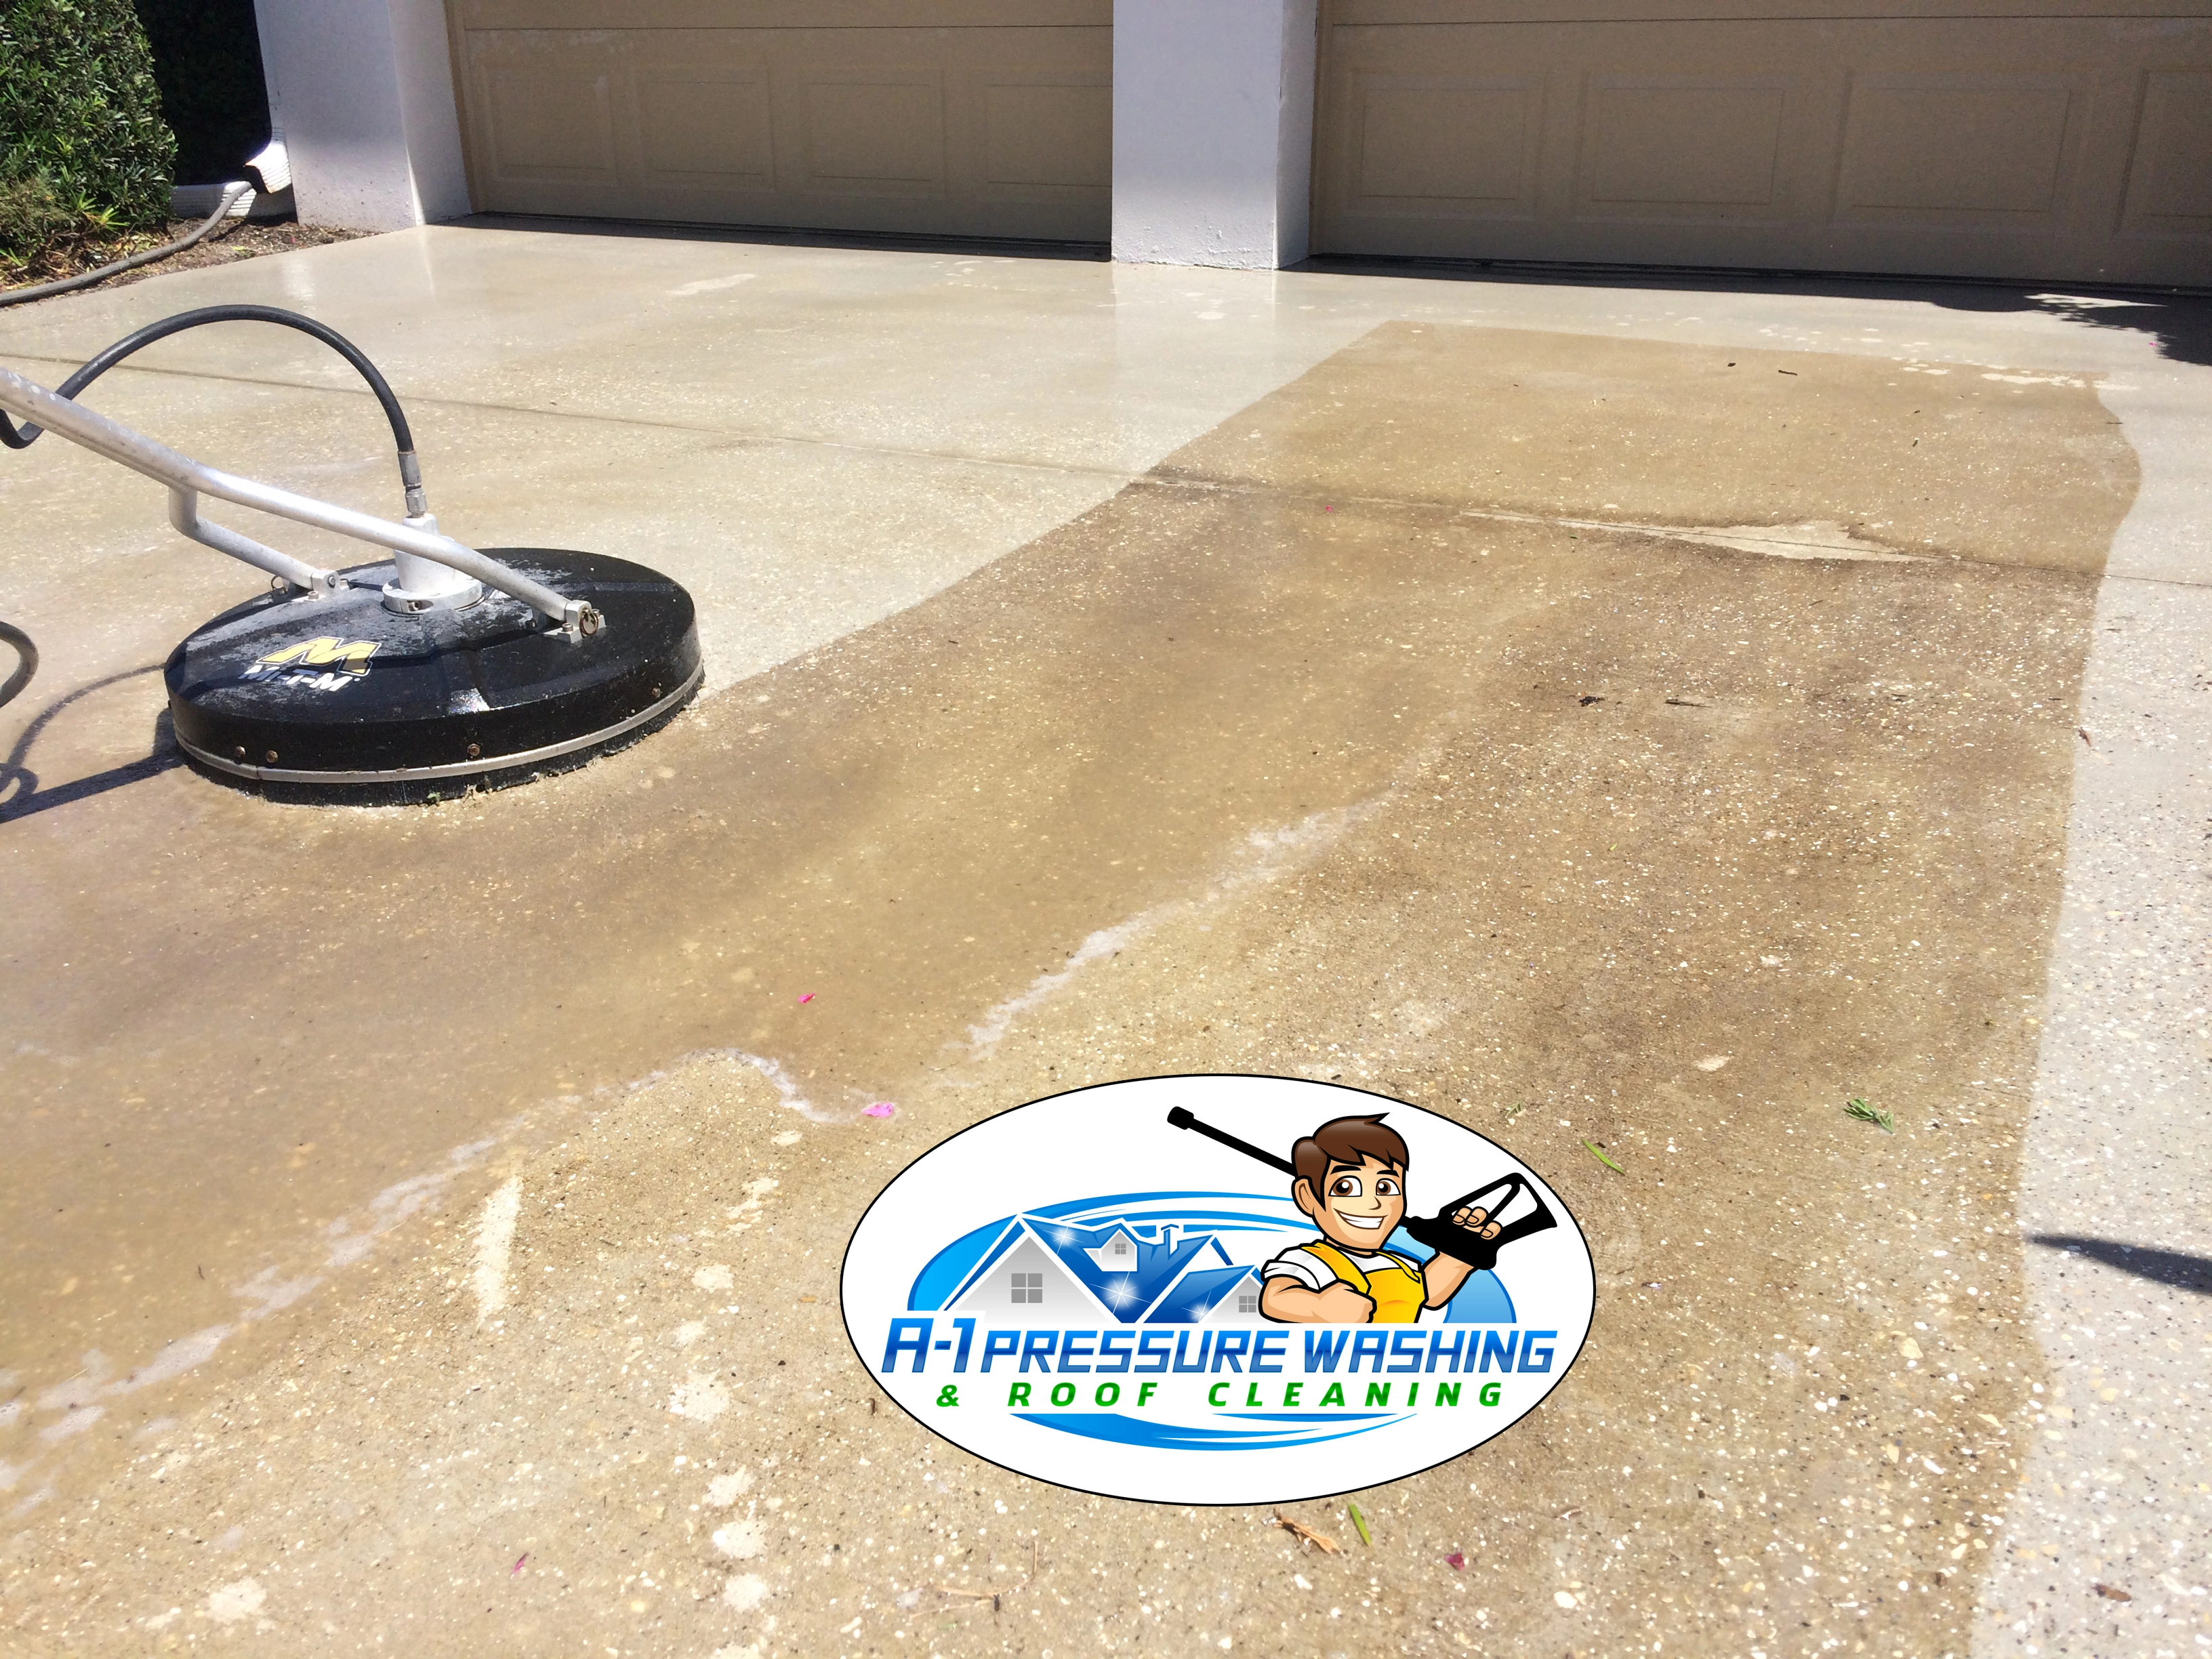 Driveway Cleaning | A-1 Pressure Washing & Roof Cleaning | 941-815-8454 